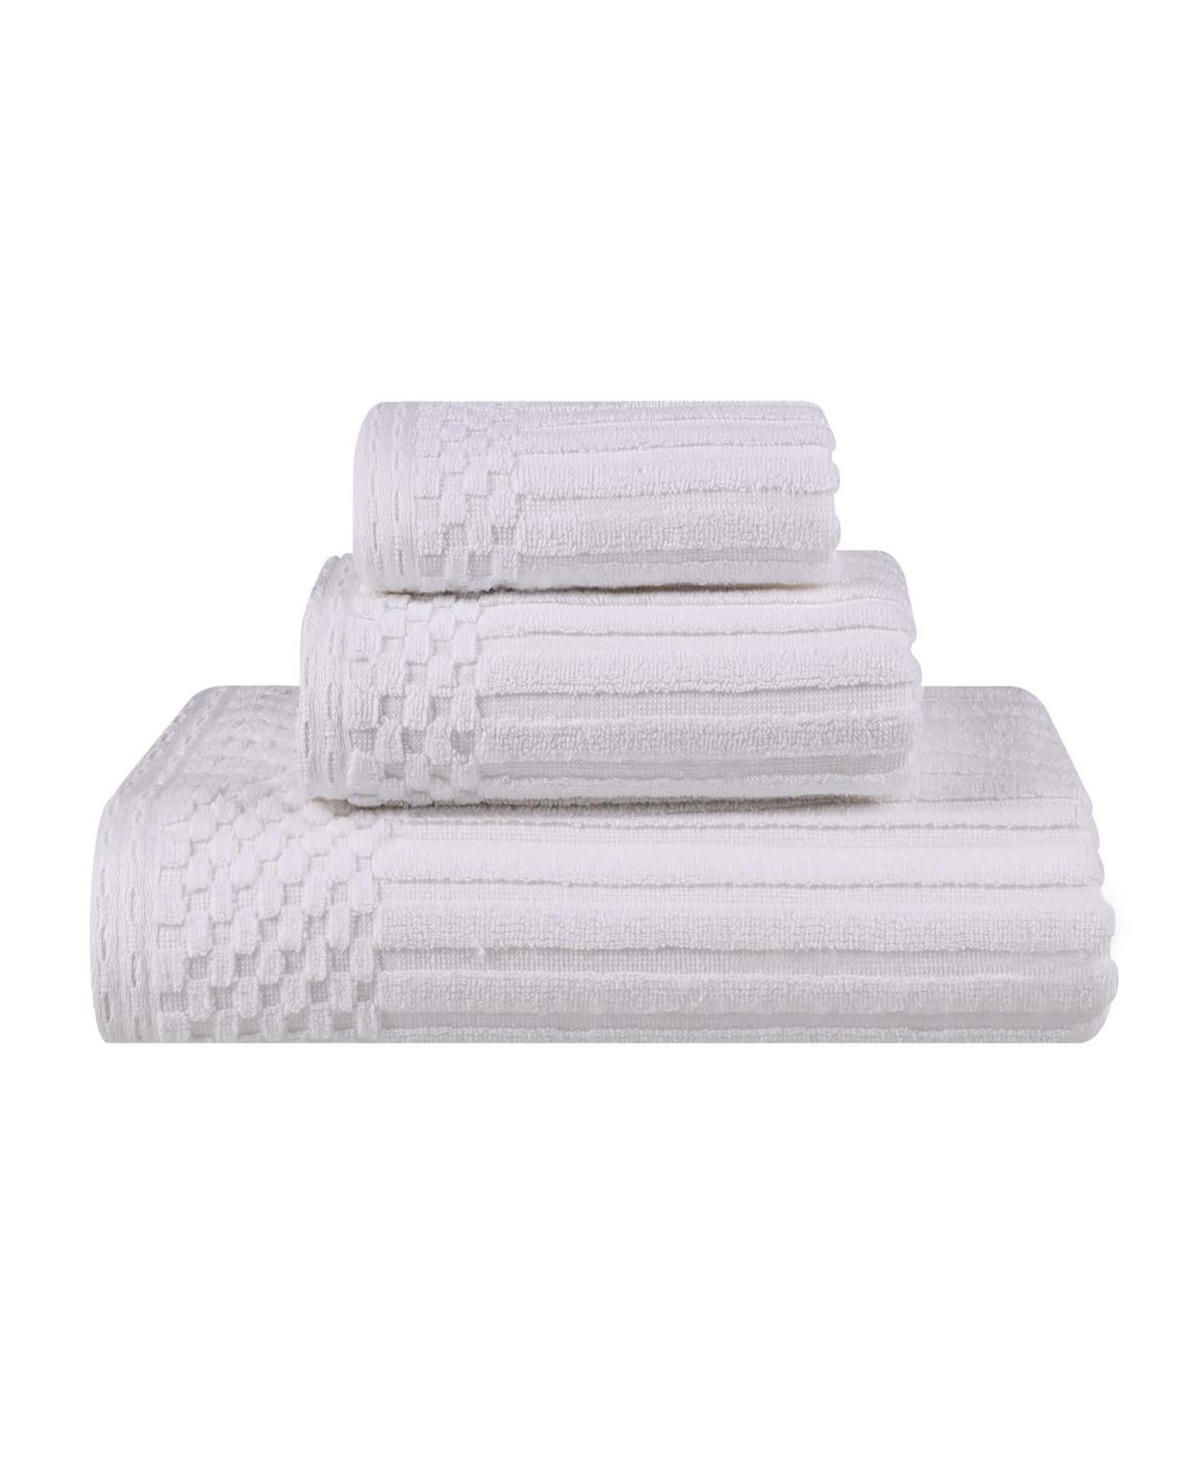 Superior Soho Checkered Border Cotton Ribbed Textured Ultra-absorbent Towel, 3 Piece Set In White